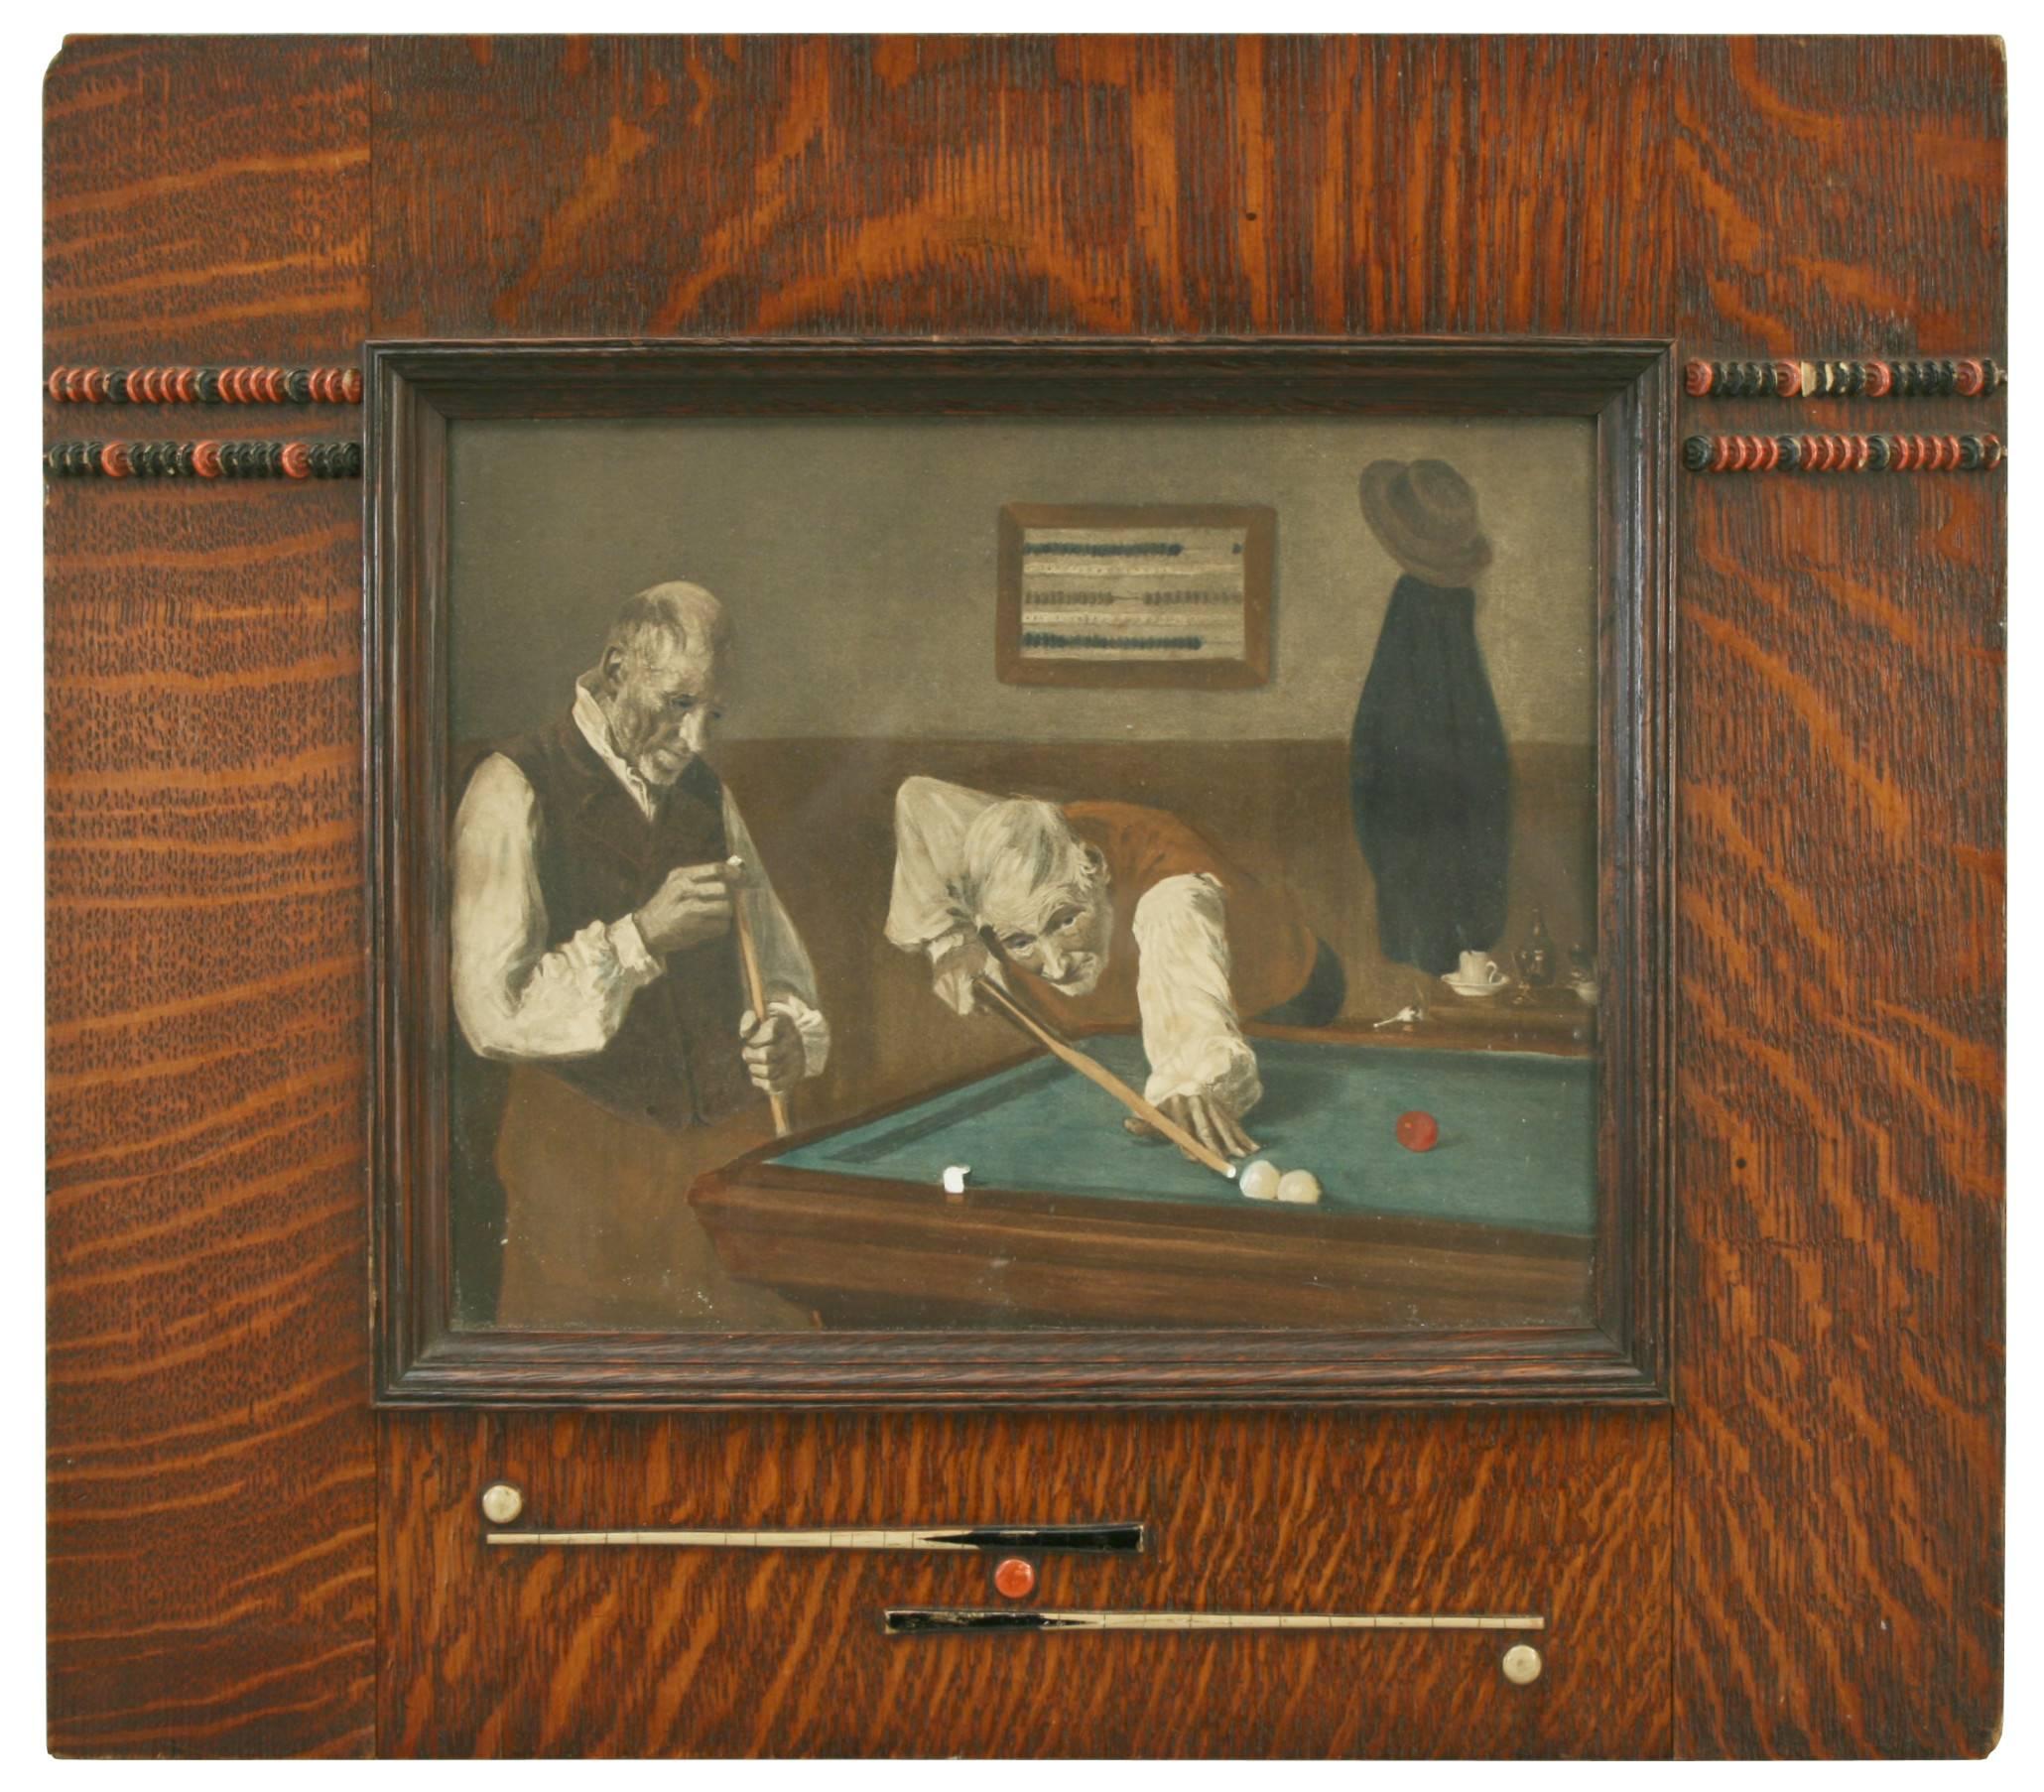 A rare billiard or snooker print. 
This wonderful image is an original hand colored photogravure in original frame. The oak frame is with applied decoration of score counters, balls and billiard cues. The image is of two gentlemen playing